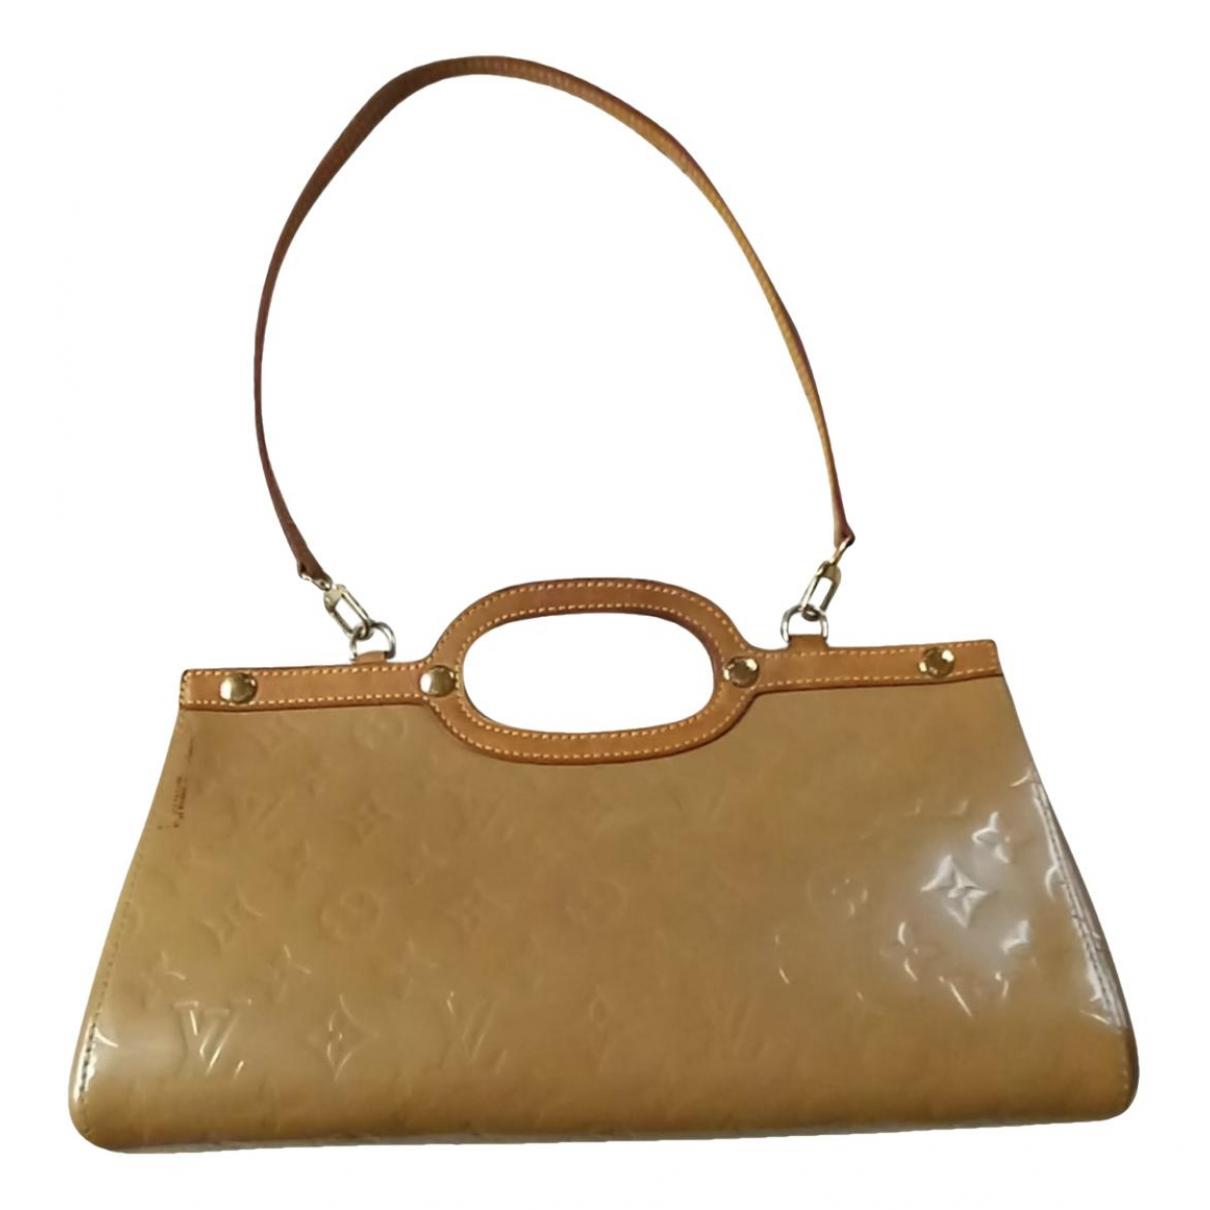 Louis Vuitton - Authenticated Roxbury Handbag - Patent Leather Yellow for Women, Very Good Condition